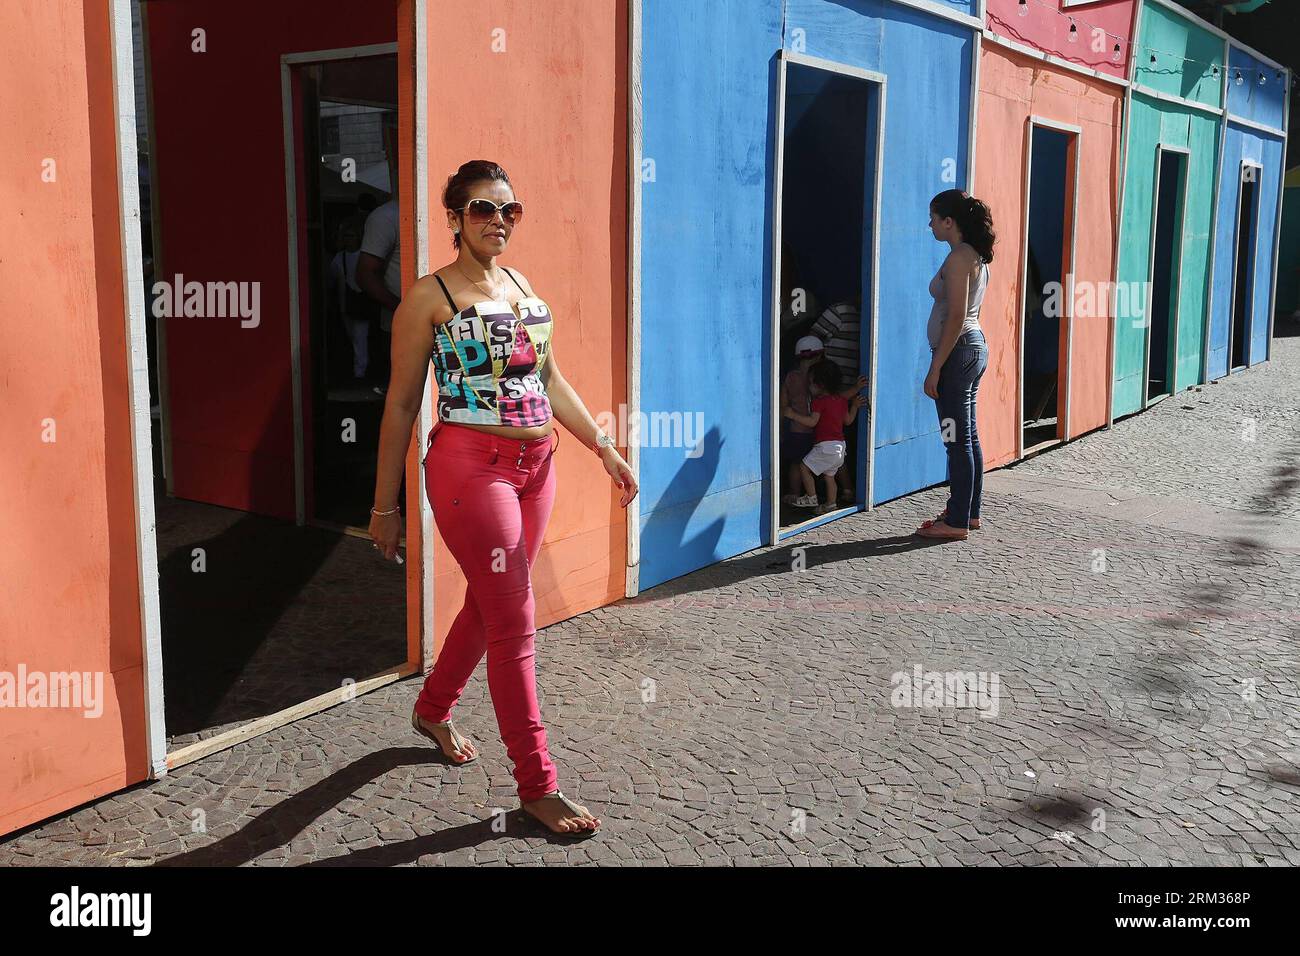 Bildnummer: 60050277  Datum: 07.07.2013  Copyright: imago/Xinhua A woman walks during the annual feast Festa Junina (June Festival), that is celebrated in the beginning of the Brazilian winter, in downtown Sao Paulo, Brazil, on July 7, 2013. The Junina Feast, which was introduced by the Portuguese during the colonial period, is celebrated during the month of June nationwide both in Brazil and Portugal with different religious festivities. (Xinhua/Rahel Patrasso) (rt) (sp) BRAZIL-SAO PAULO-SOCIETY-JUNE FESTIVAL PUBLICATIONxNOTxINxCHN Gesellschaft Fest Feier x0x xrj 2013 quer     60050277 Date 0 Stock Photo